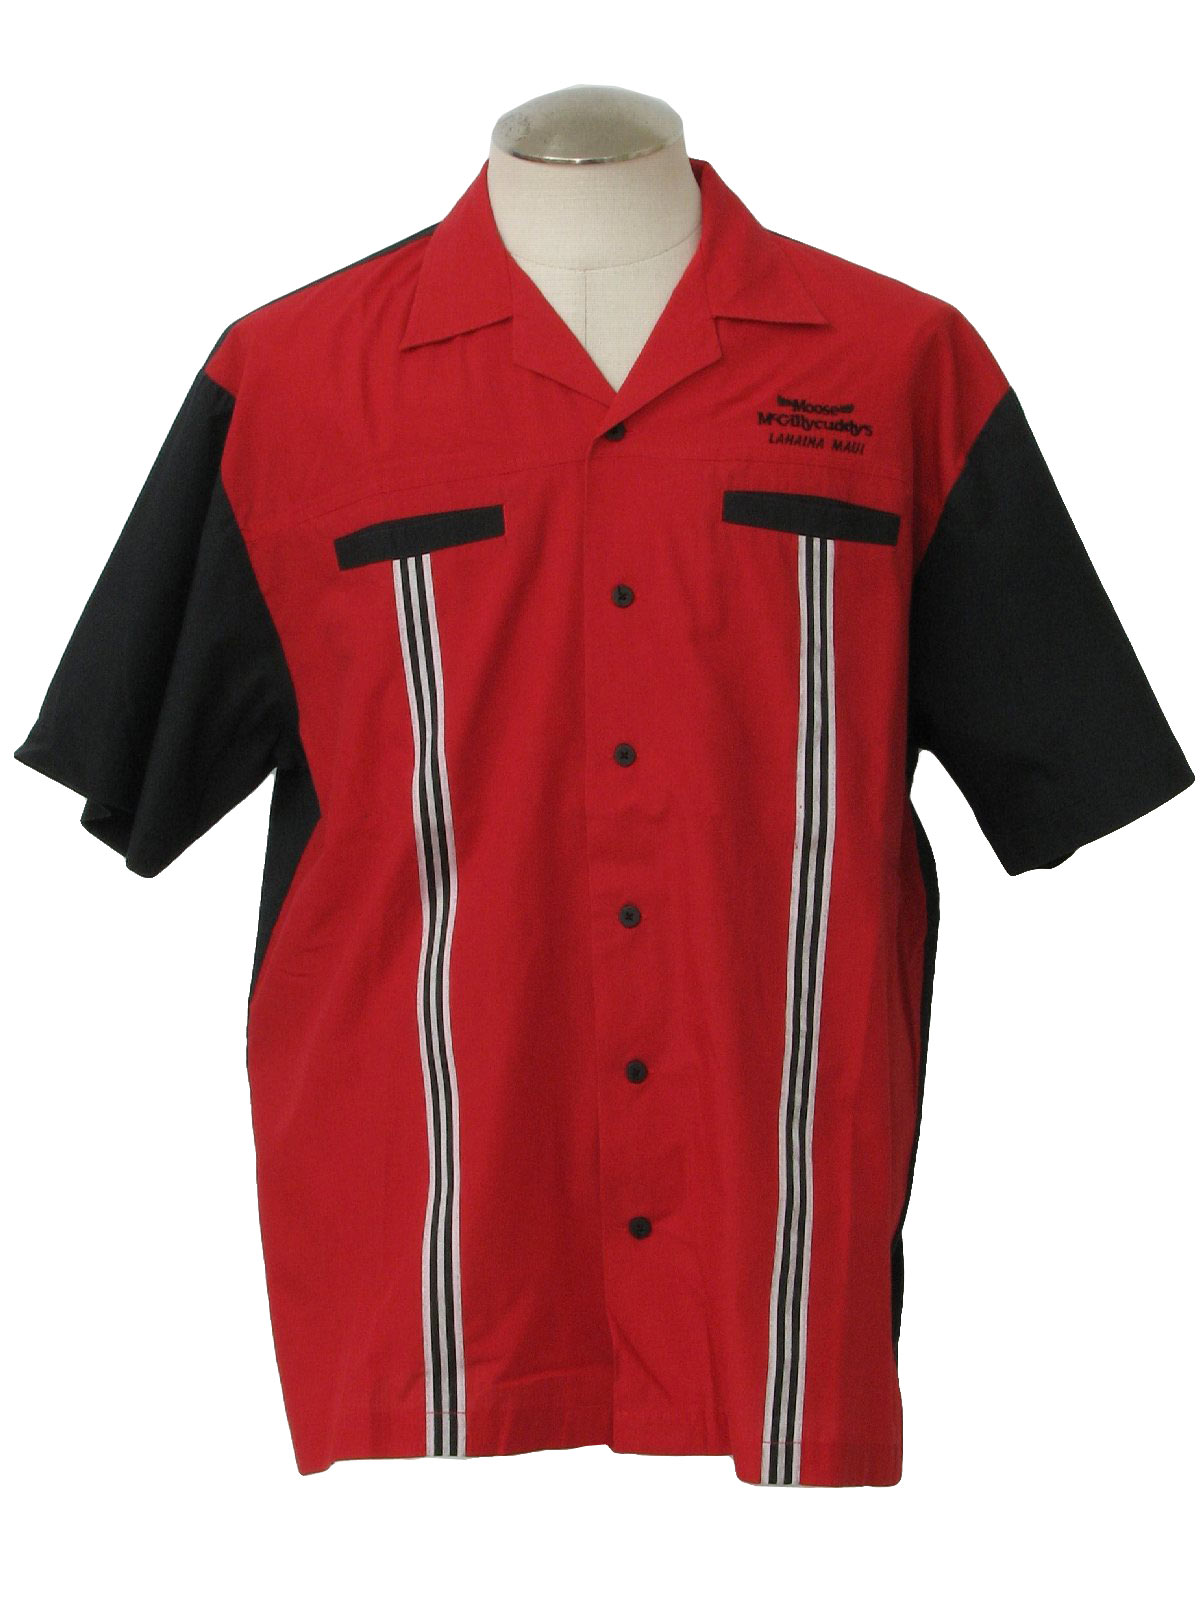 Retro 90's Bowling Shirt: 90s -Hilton- Mens red and black polyester ...